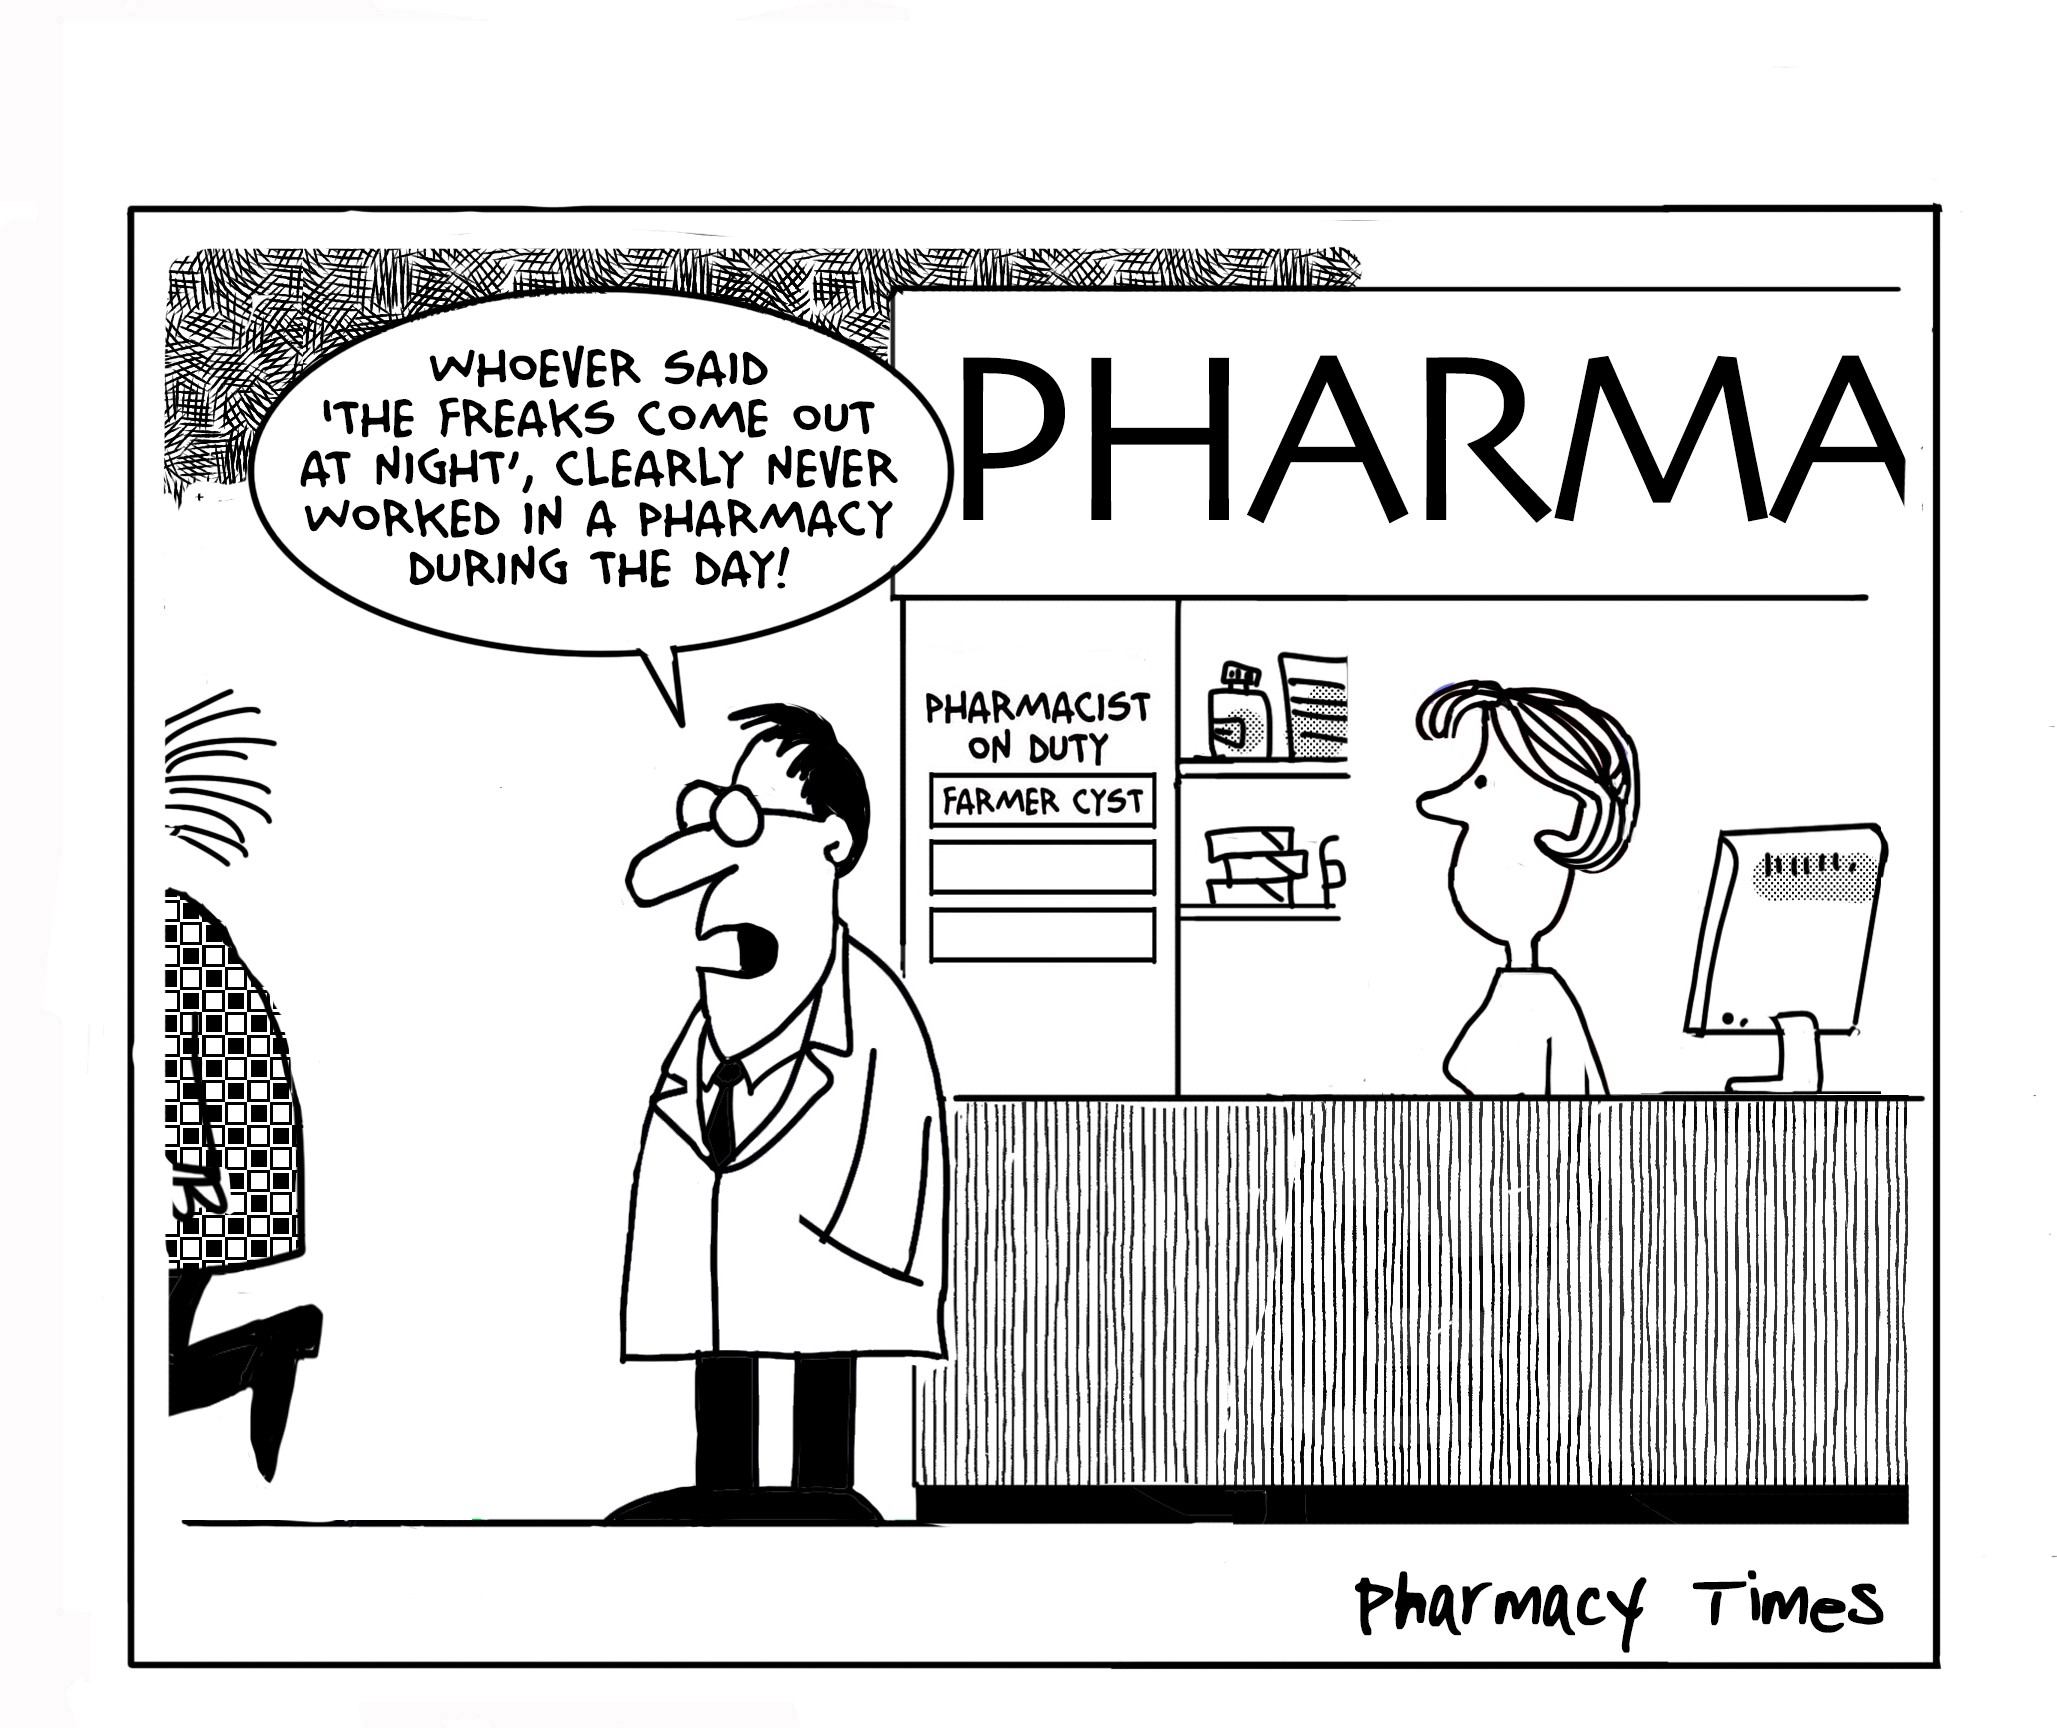 Farmer Cyst – Just another day in the pharmacy | The Pharmacy Times